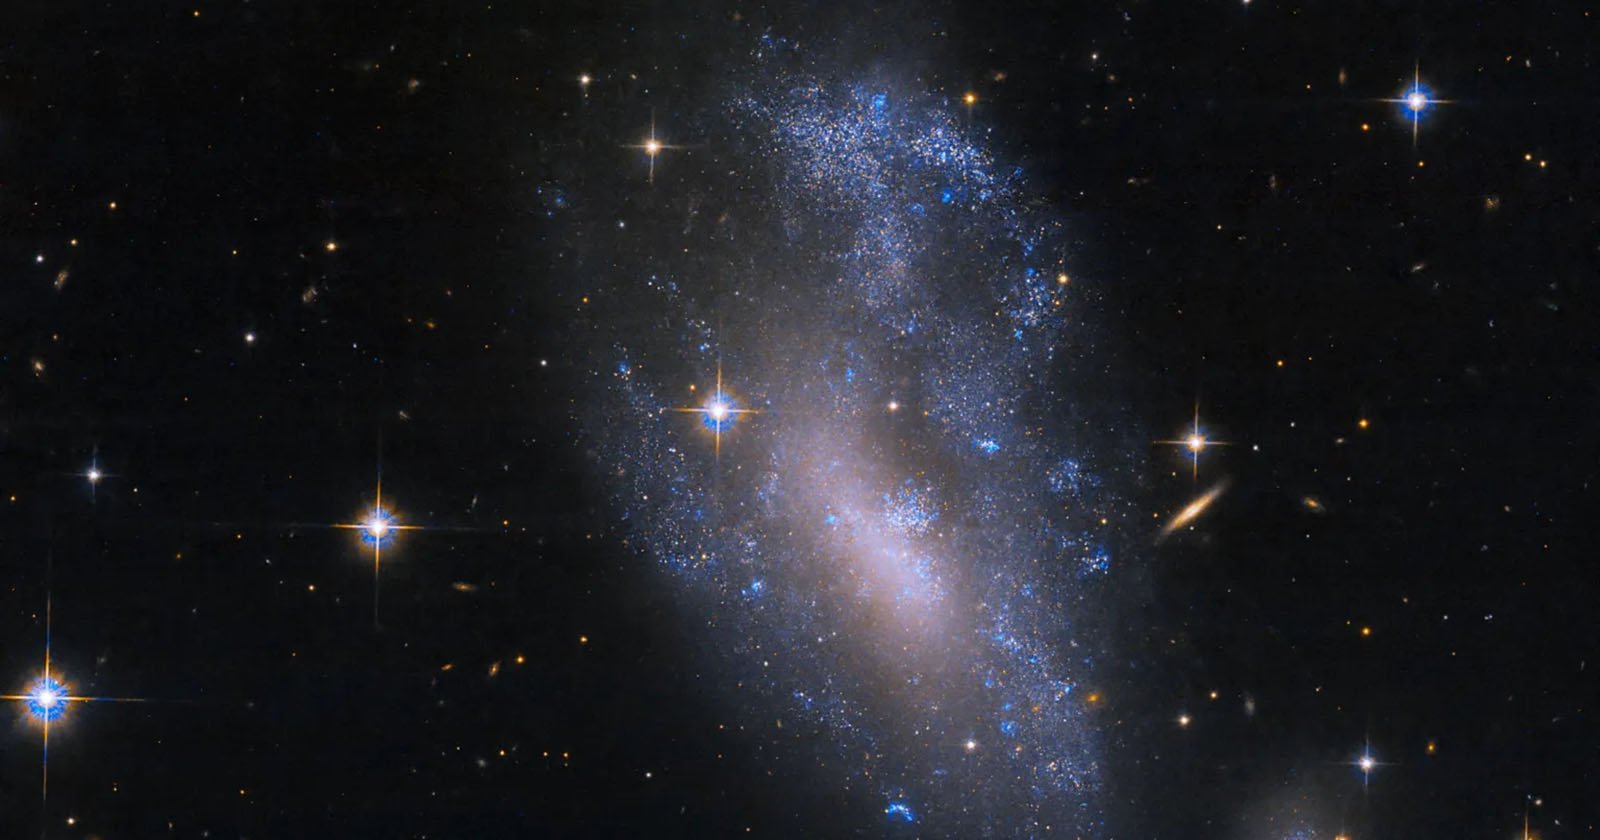 A Galactic Interaction Smushed This Spiral Galaxy